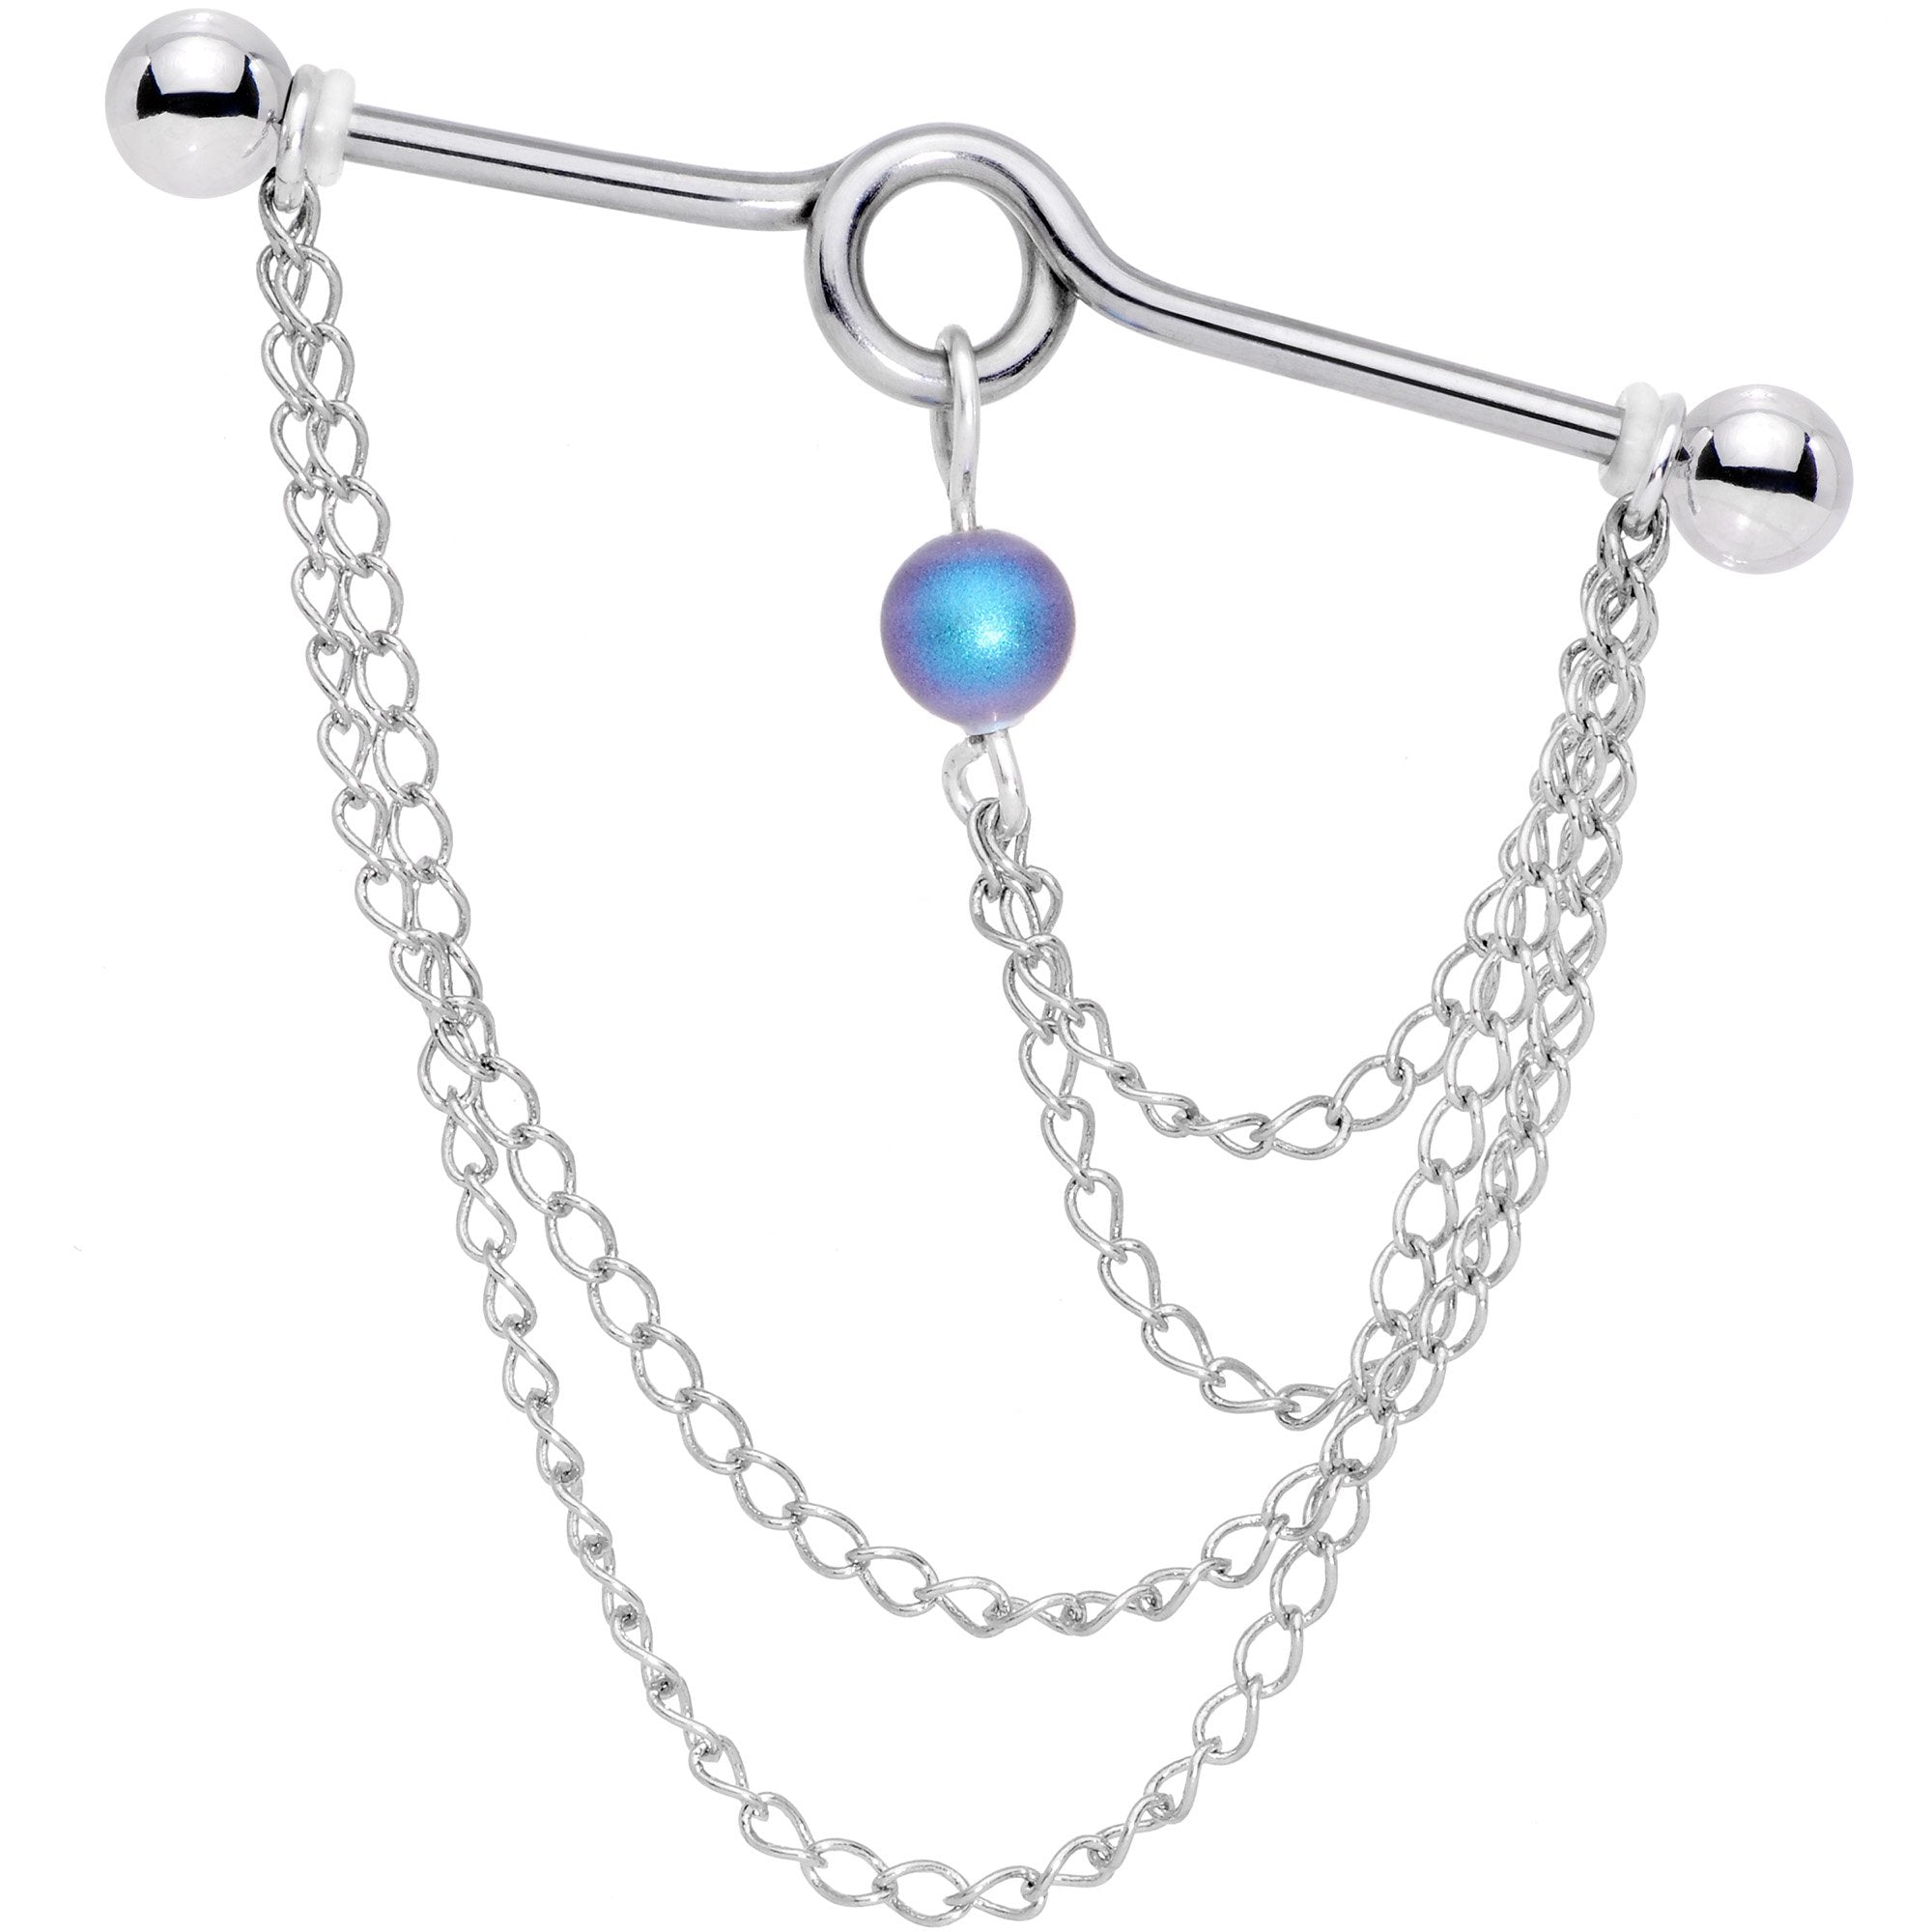 Tri Chain Industrial Barbell Created with Crystals